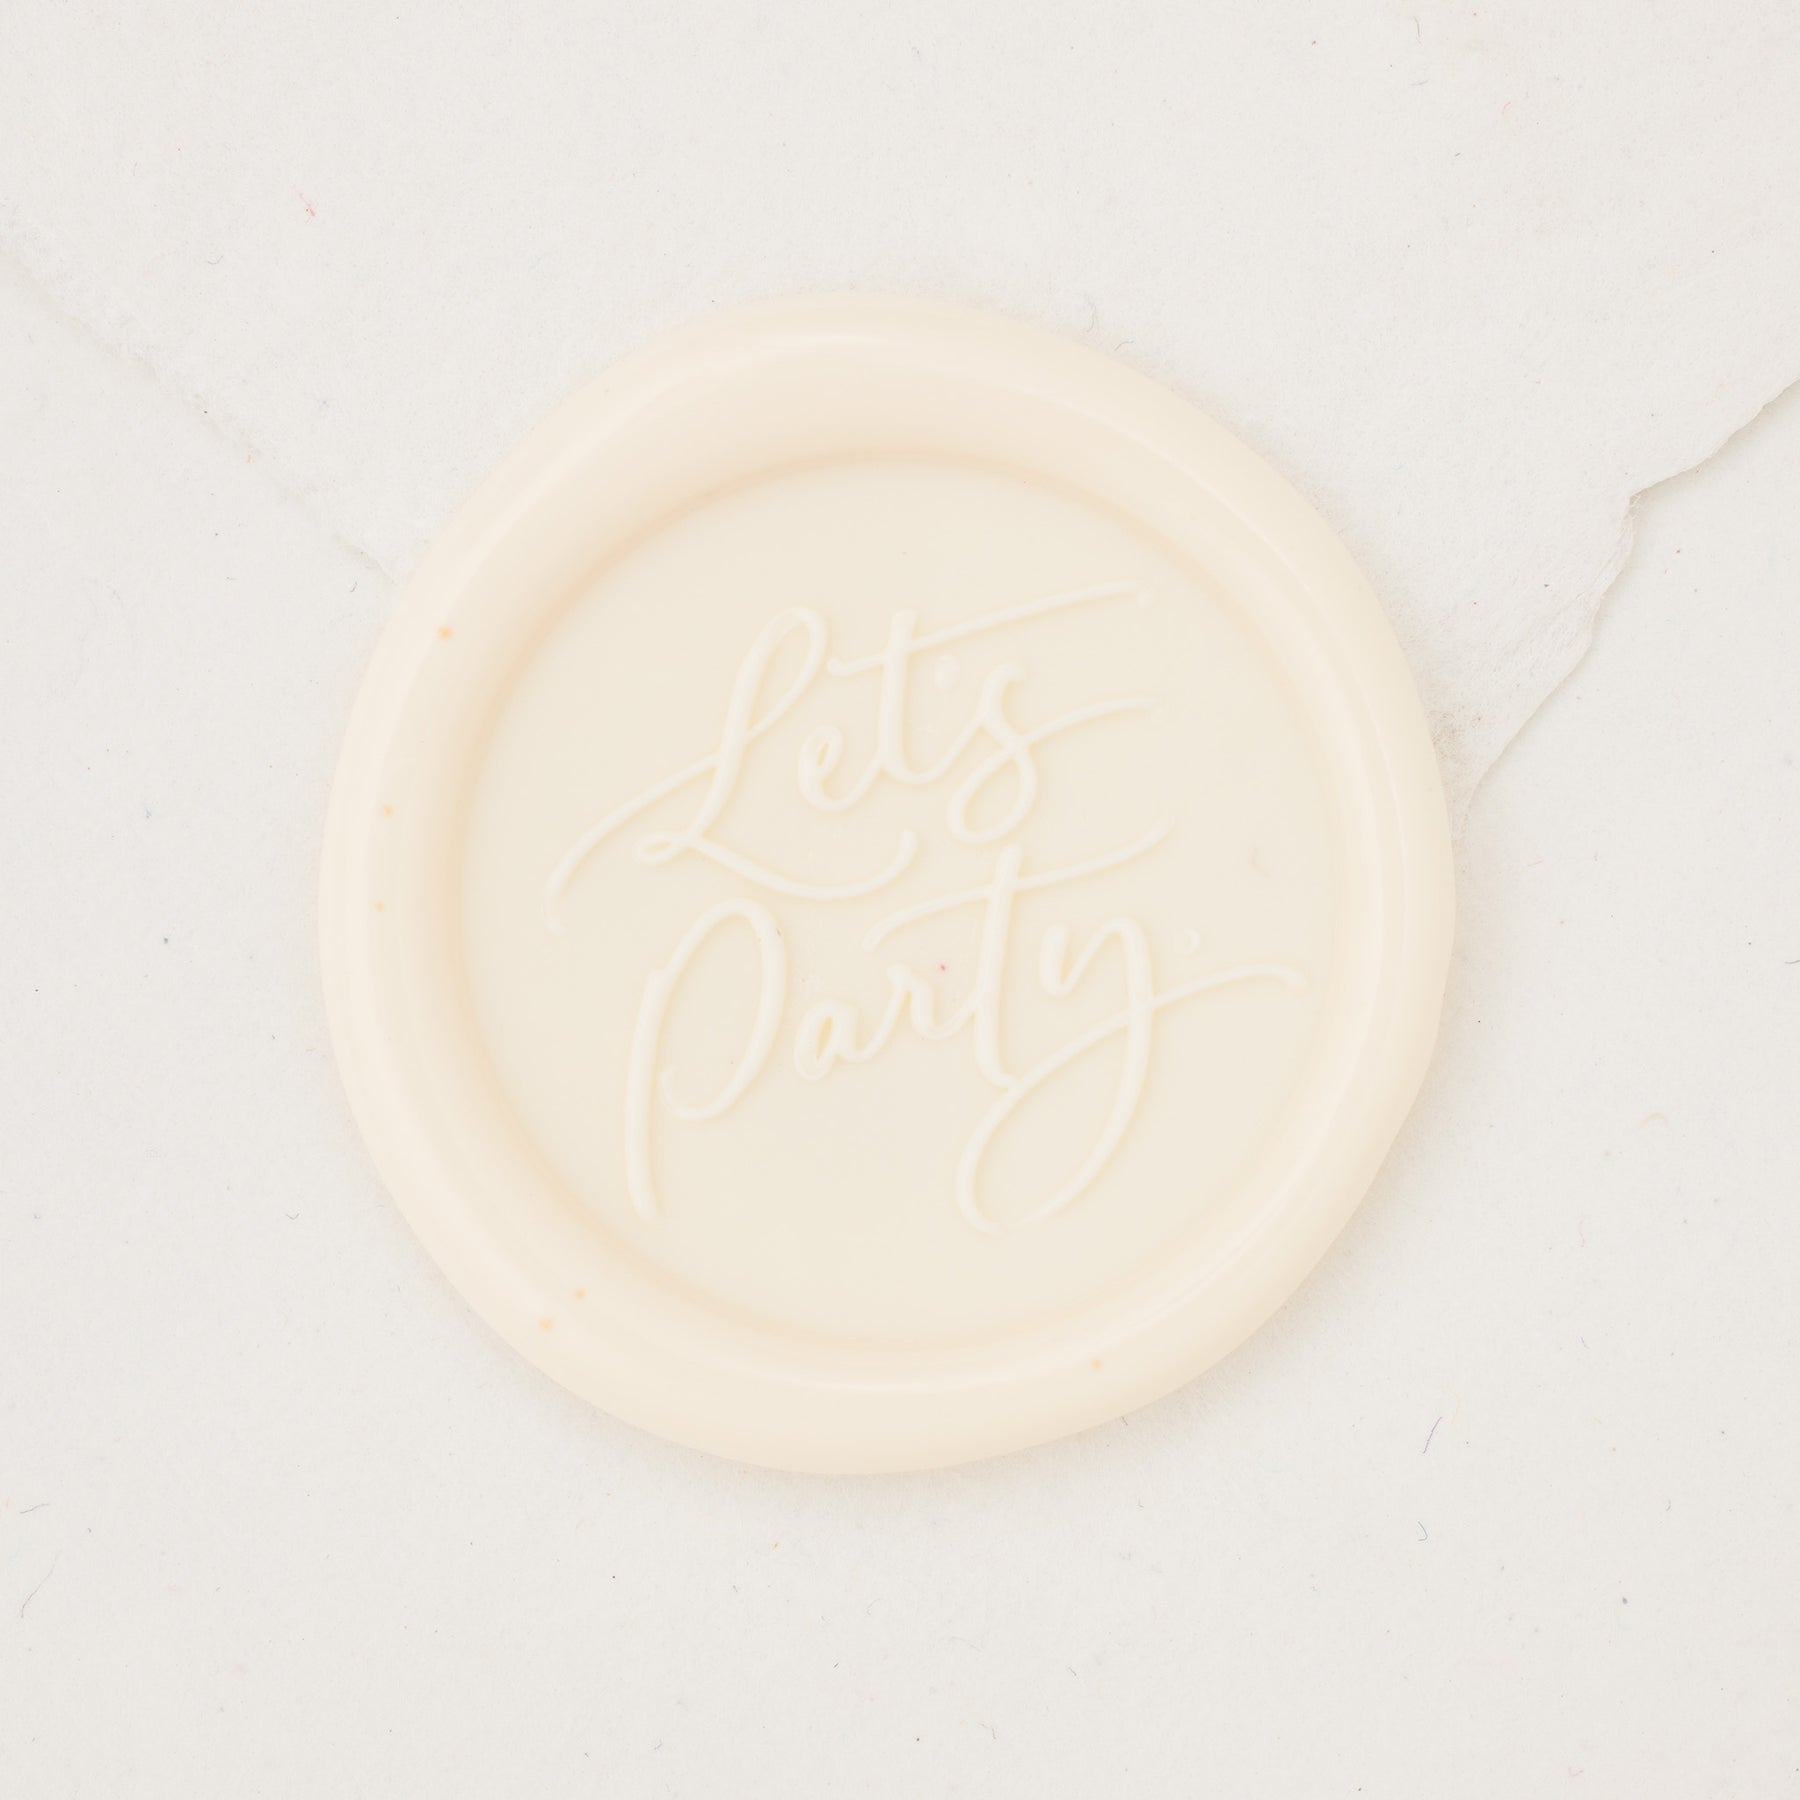 wax seal stickers 41pcs Perfect For Wedding Event Seating Chart Letter  Decor Etc - Tony's Restaurant in Alton, IL